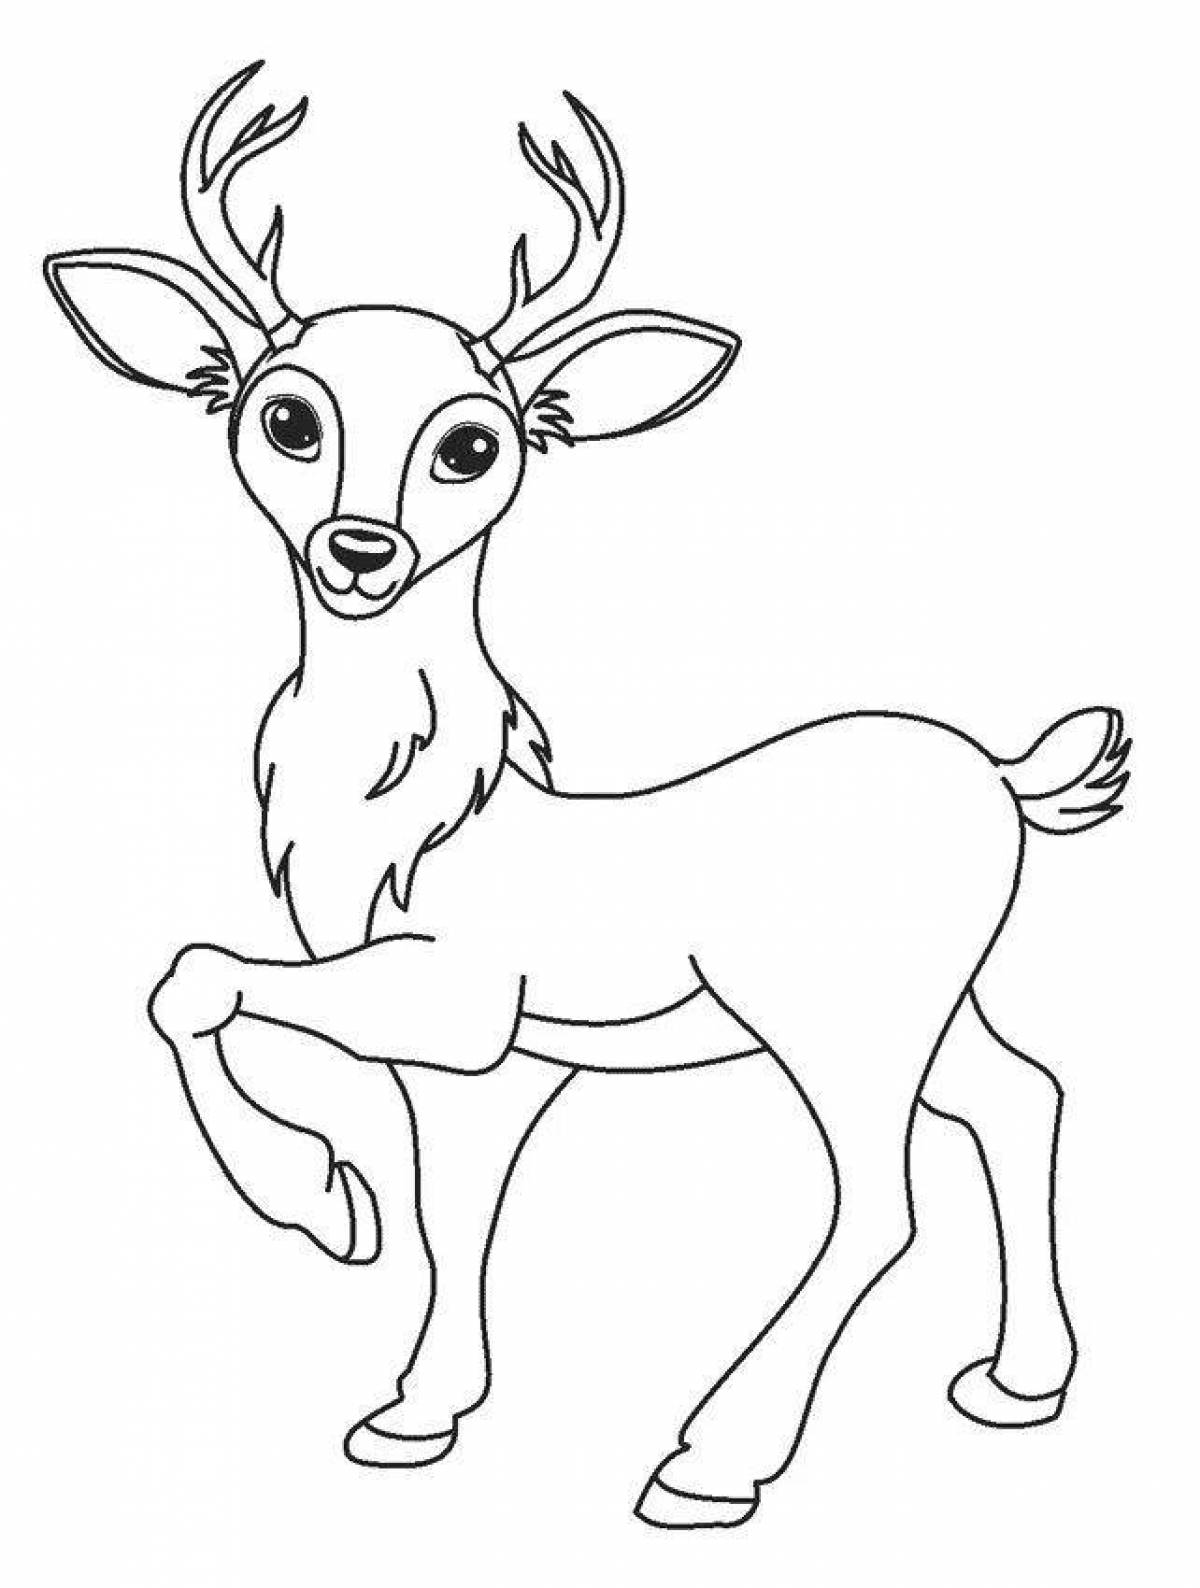 Holiday deer coloring page for kids